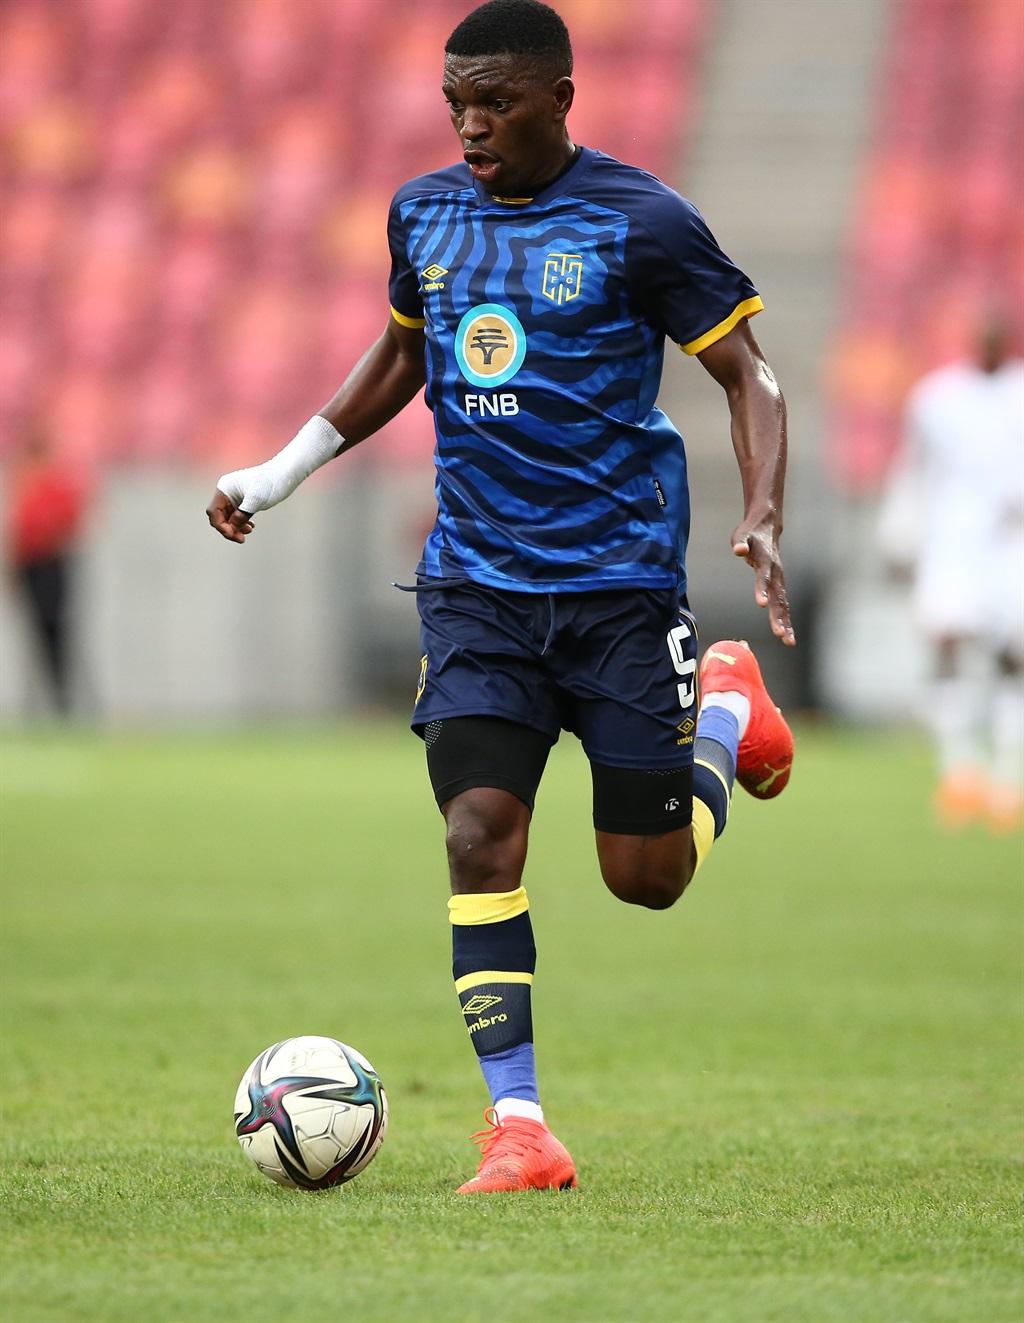 GQEBERHA, SOUTH AFRICA - JANUARY 14: Fidel Brice Ambina of Cape Town City during the DStv Premiership match between Chippa United and Cape Town City FC at Nelson Mandela Bay Stadium on January 14, 2023 in Gqeberha, South Africa. (Photo by Richard Huggard/Gallo Images)